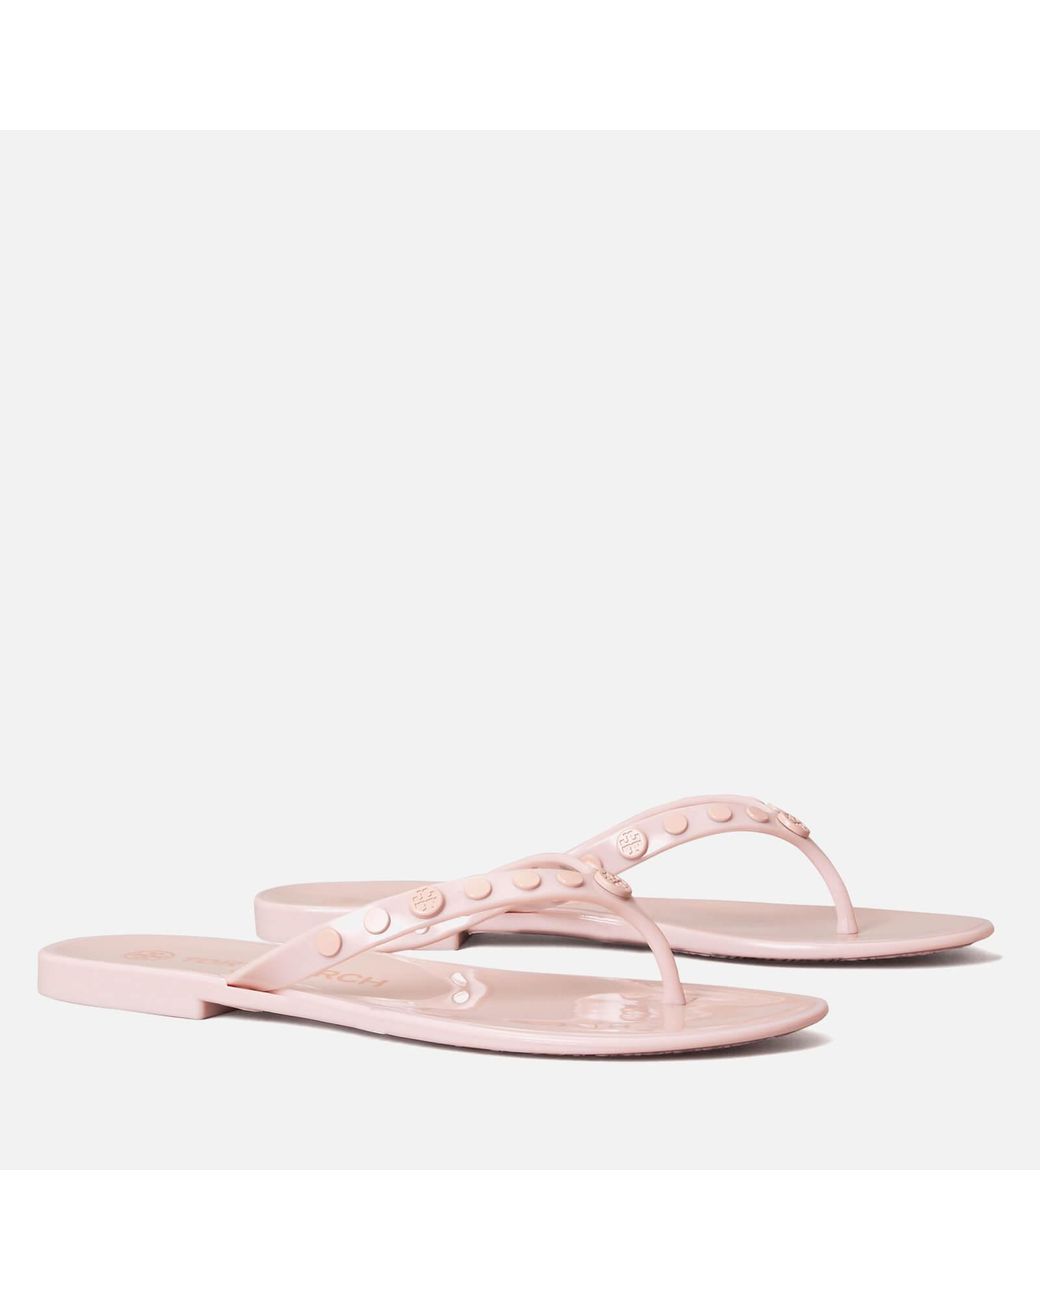 Tory Burch Studded Jelly Flip Flops in Pink | Lyst